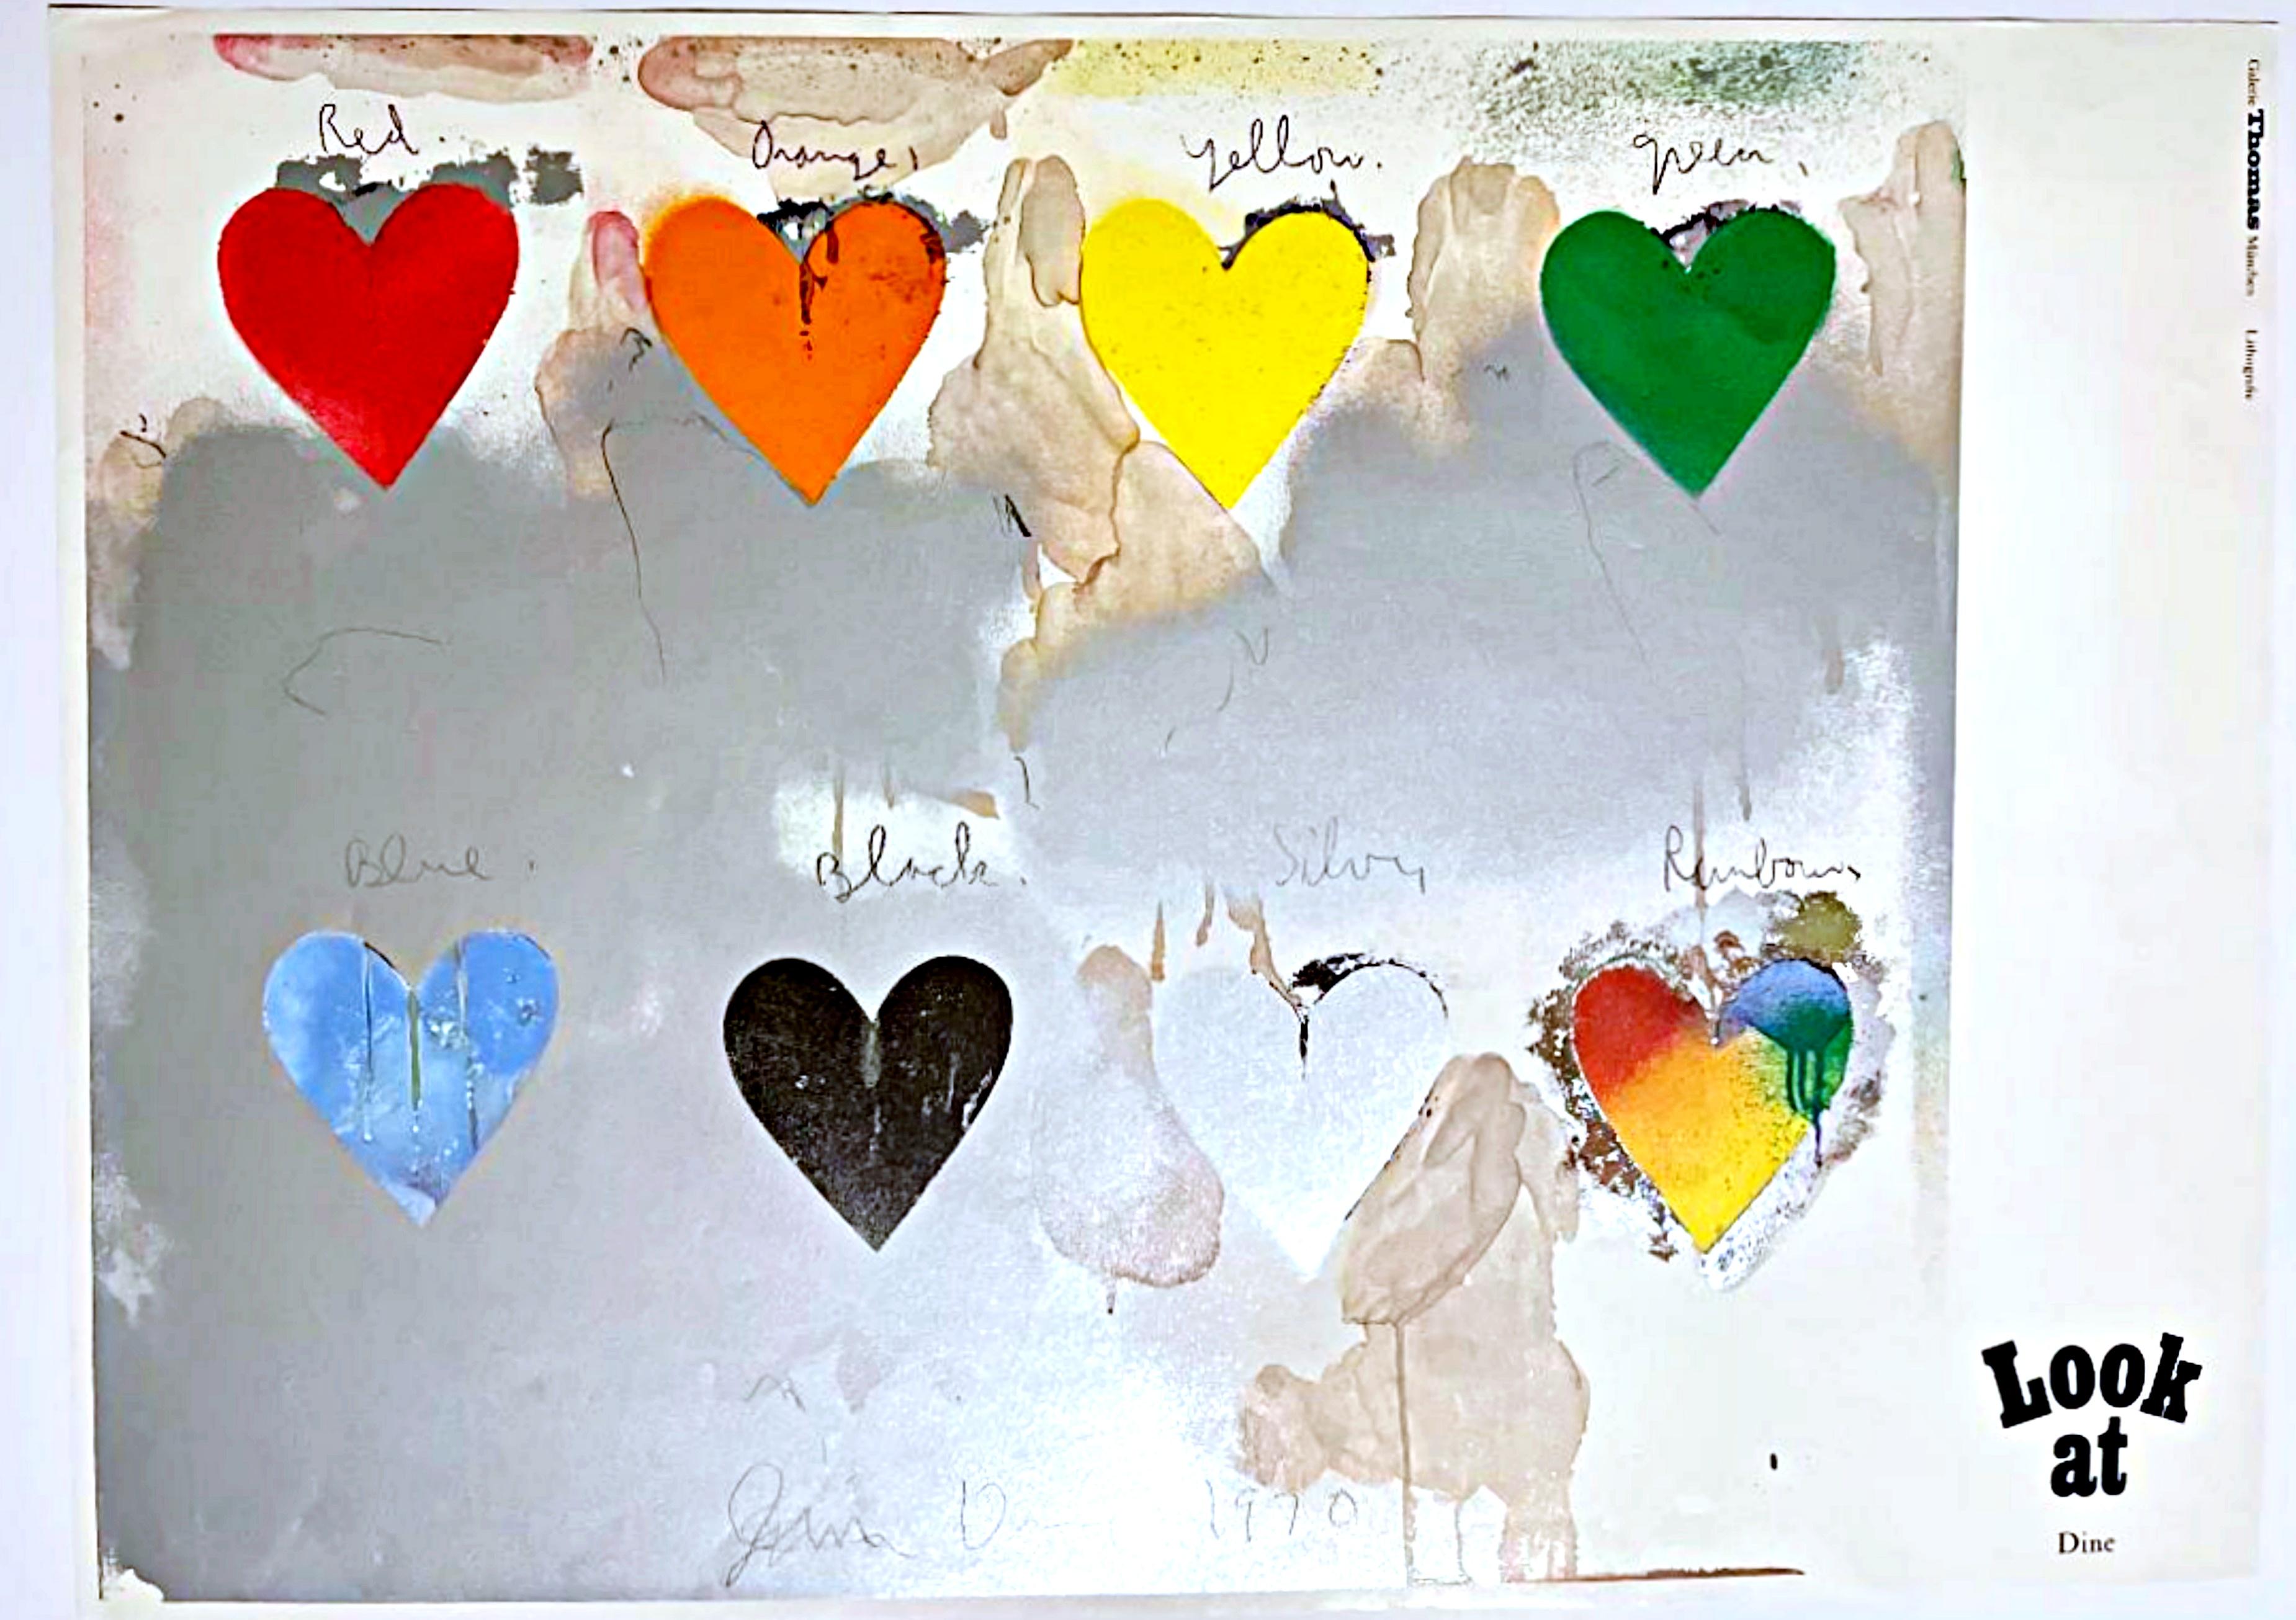 Jim Dine Abstract Print - Eight Hearts (7 Colored & 1 Rainbow Heart) -Original limited ed. European poster